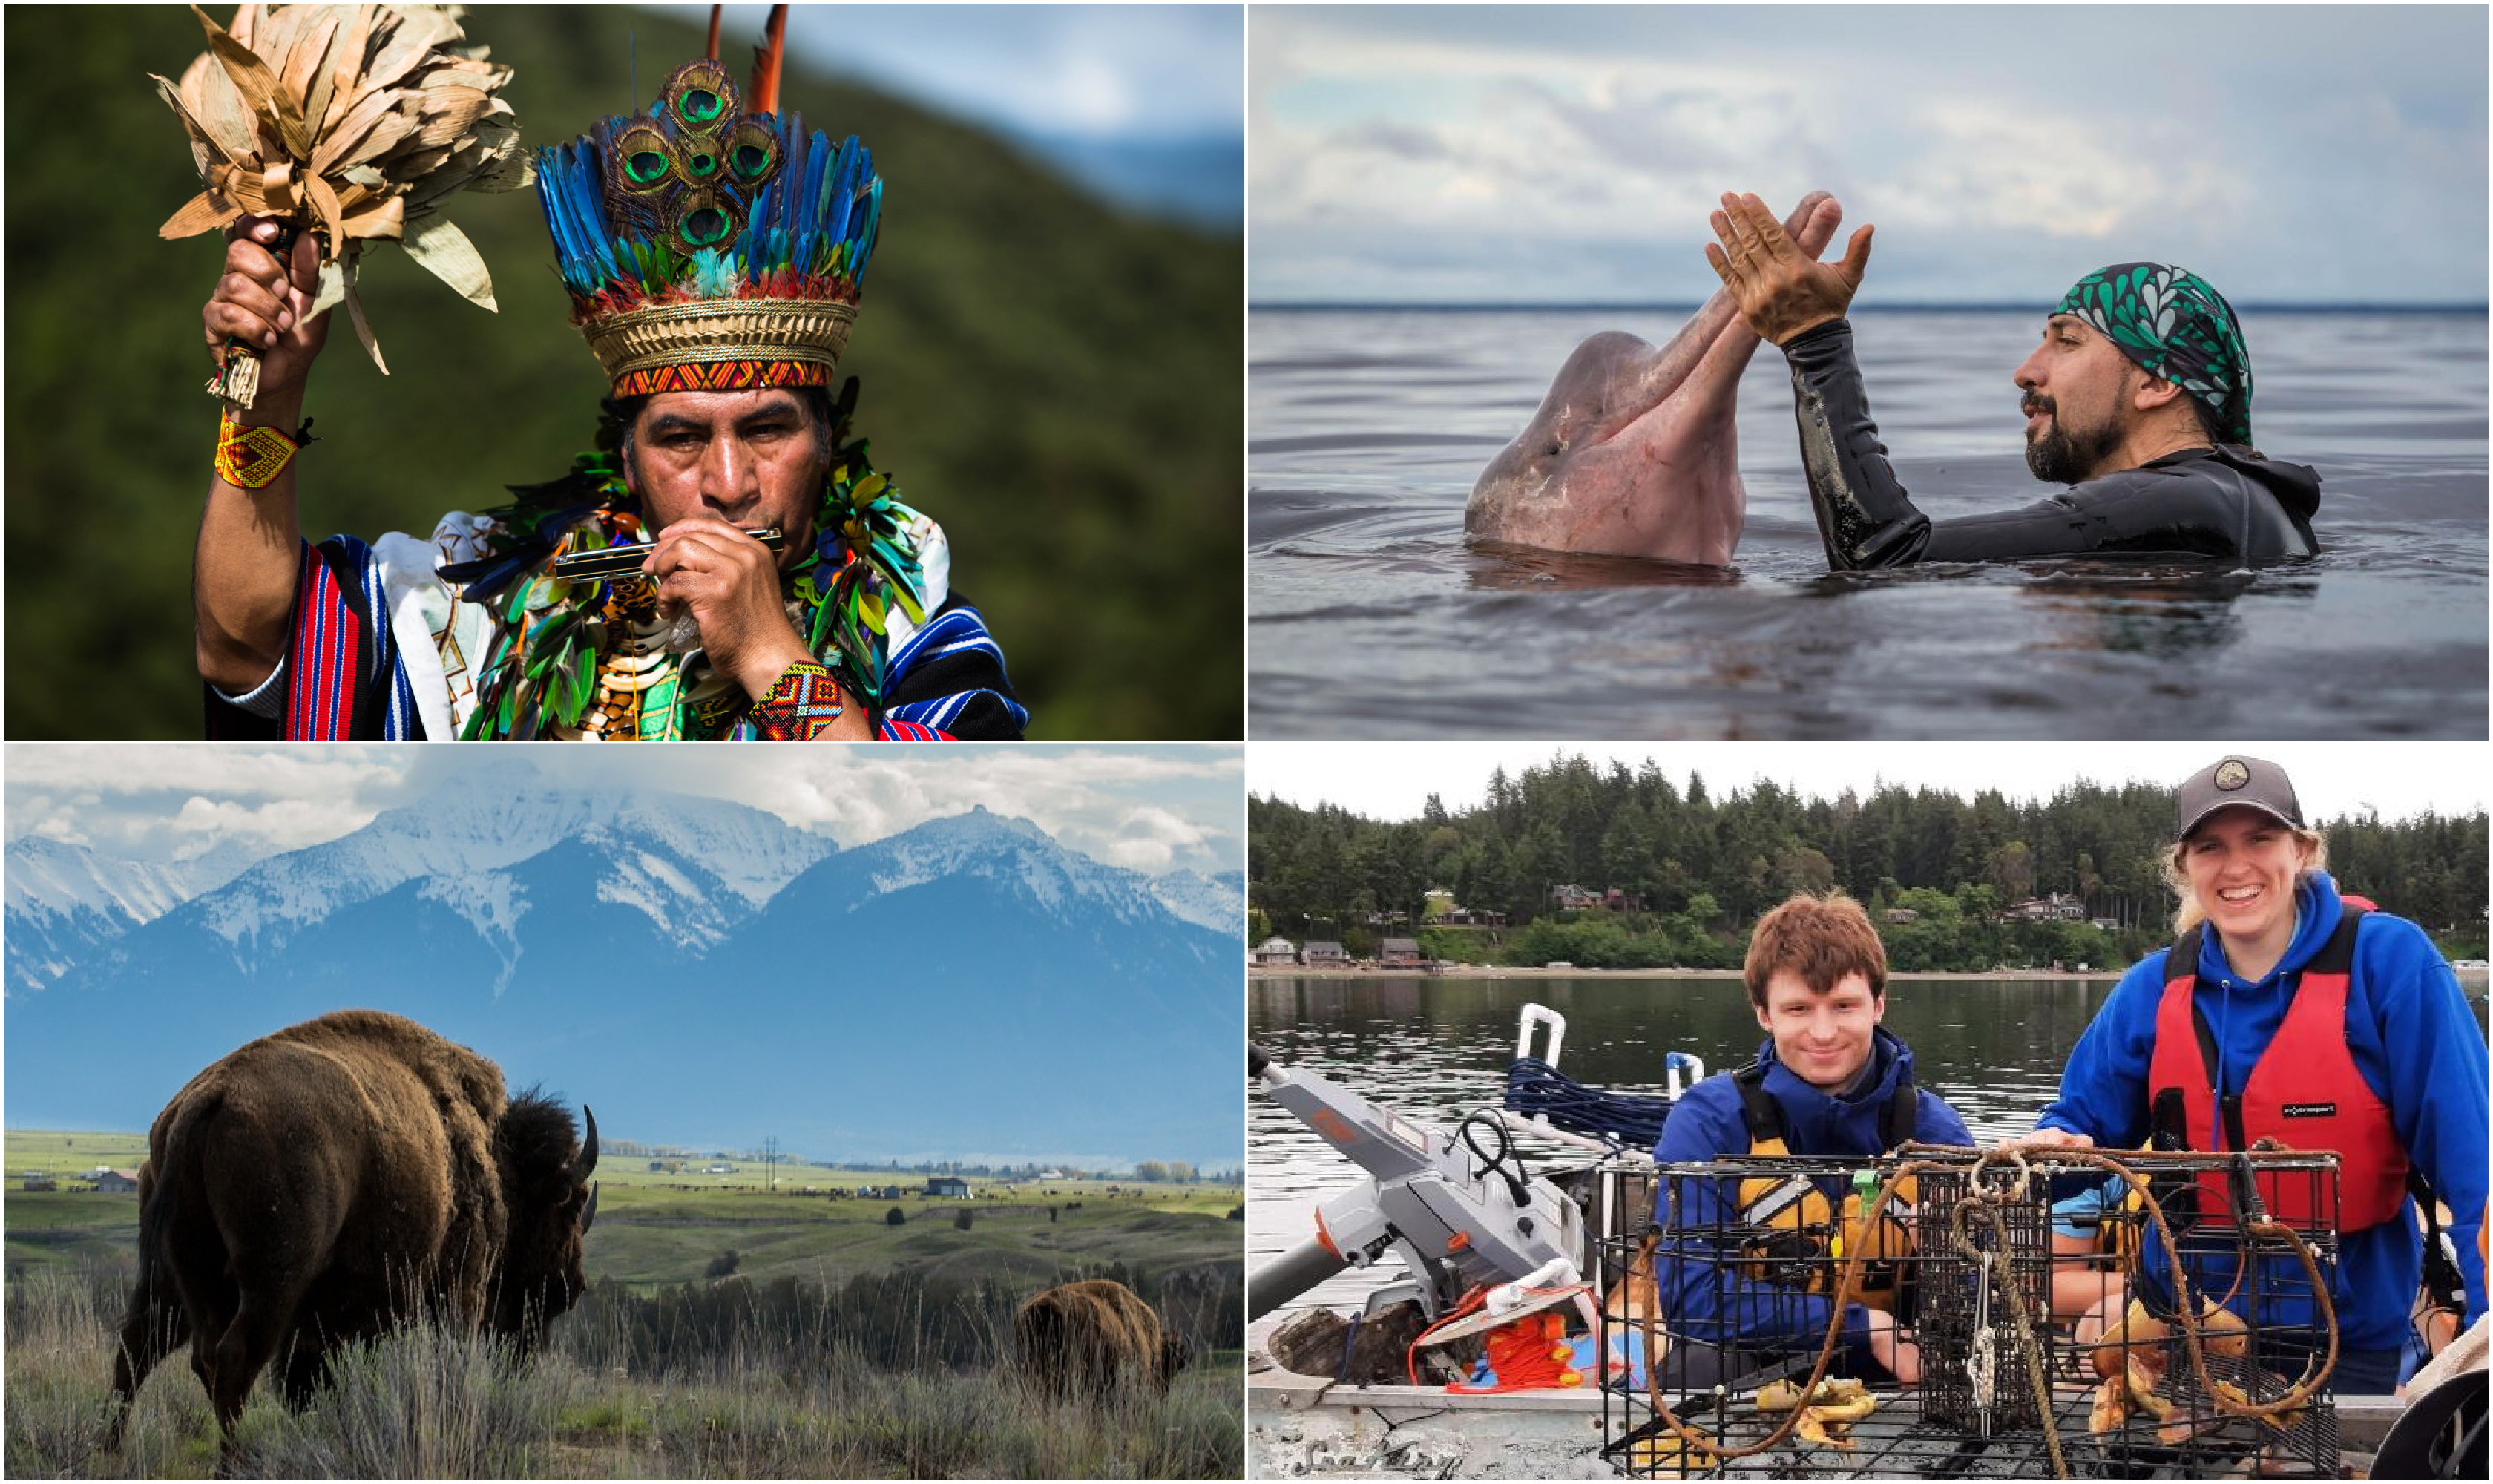 Four photos from the winning competition stories